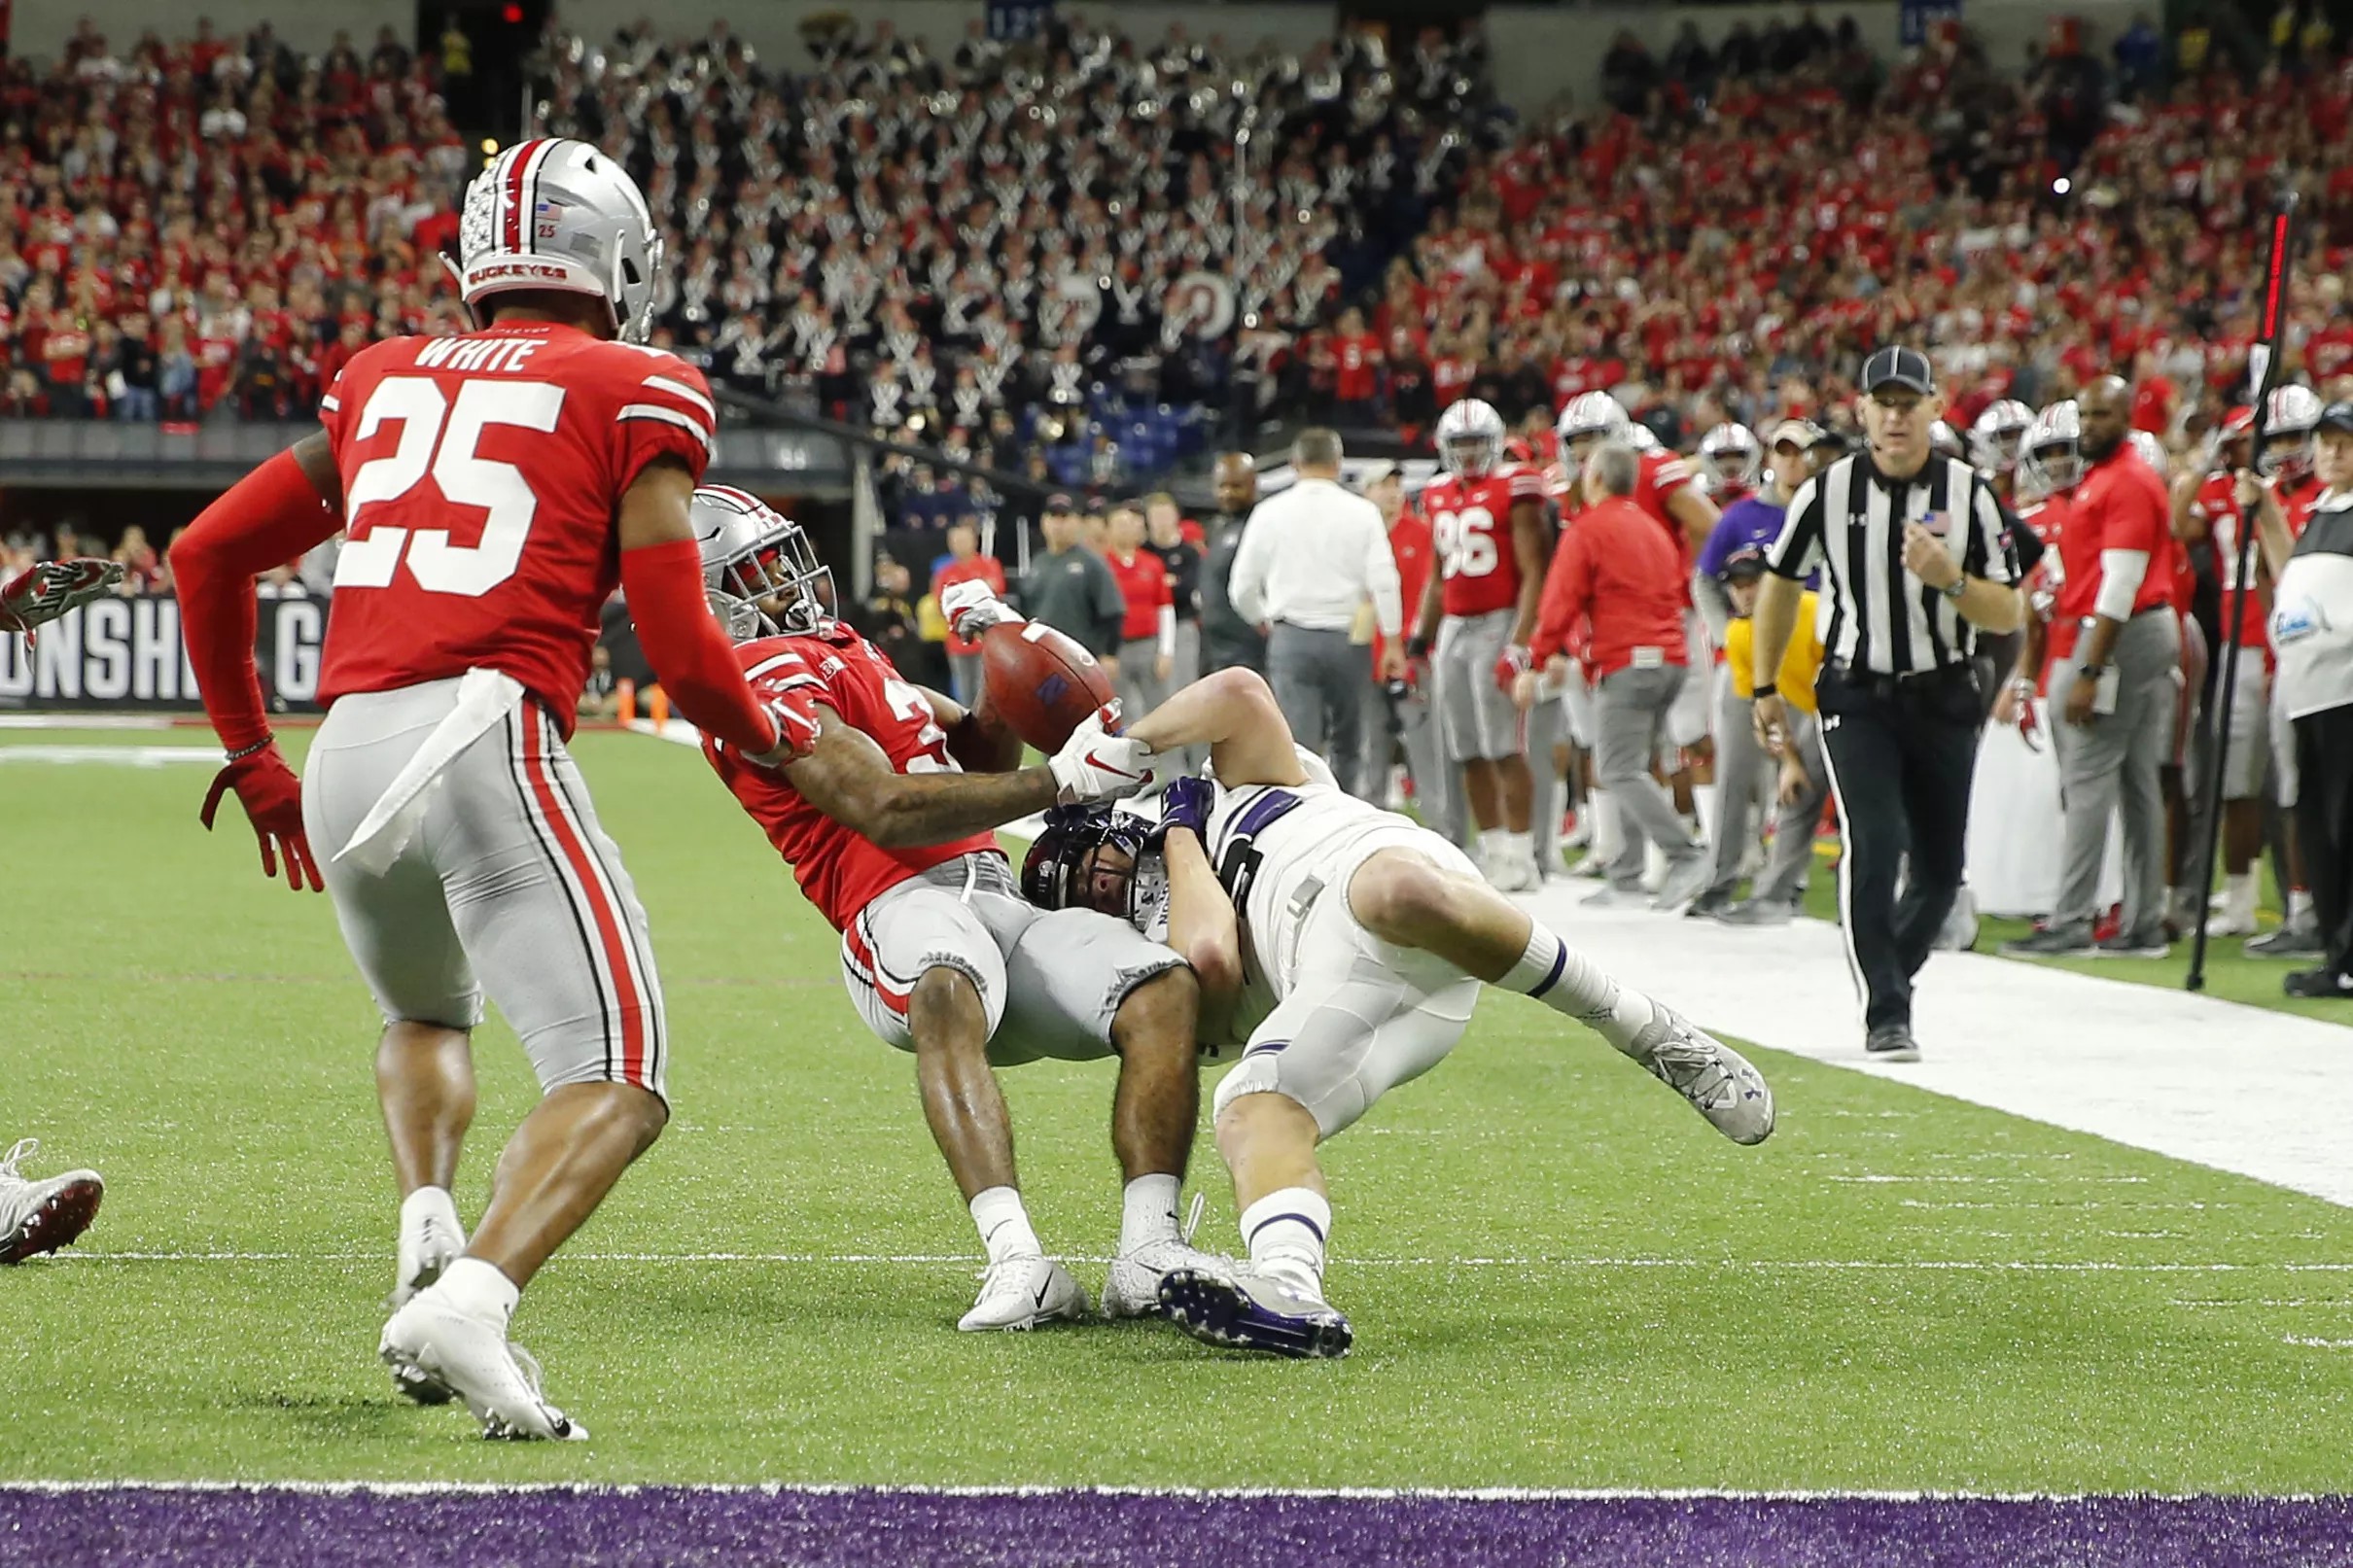 Six of the weirdest things that happened during Northwestern-Ohio State